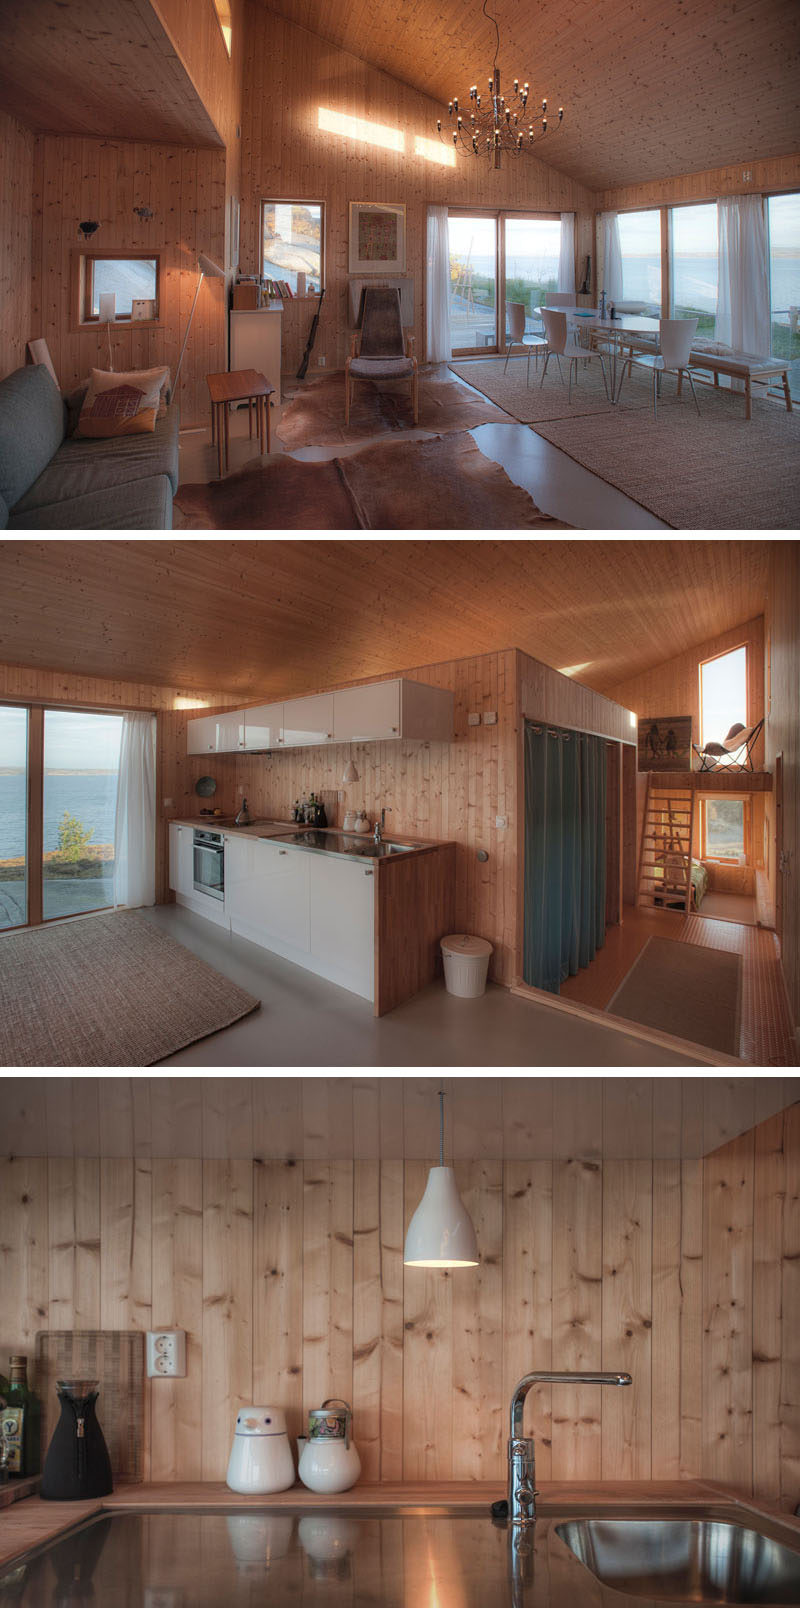 This wooden cabin features an open living, dining and kitchen area with lots of windows to let natural light in and to take advantage of the water views.